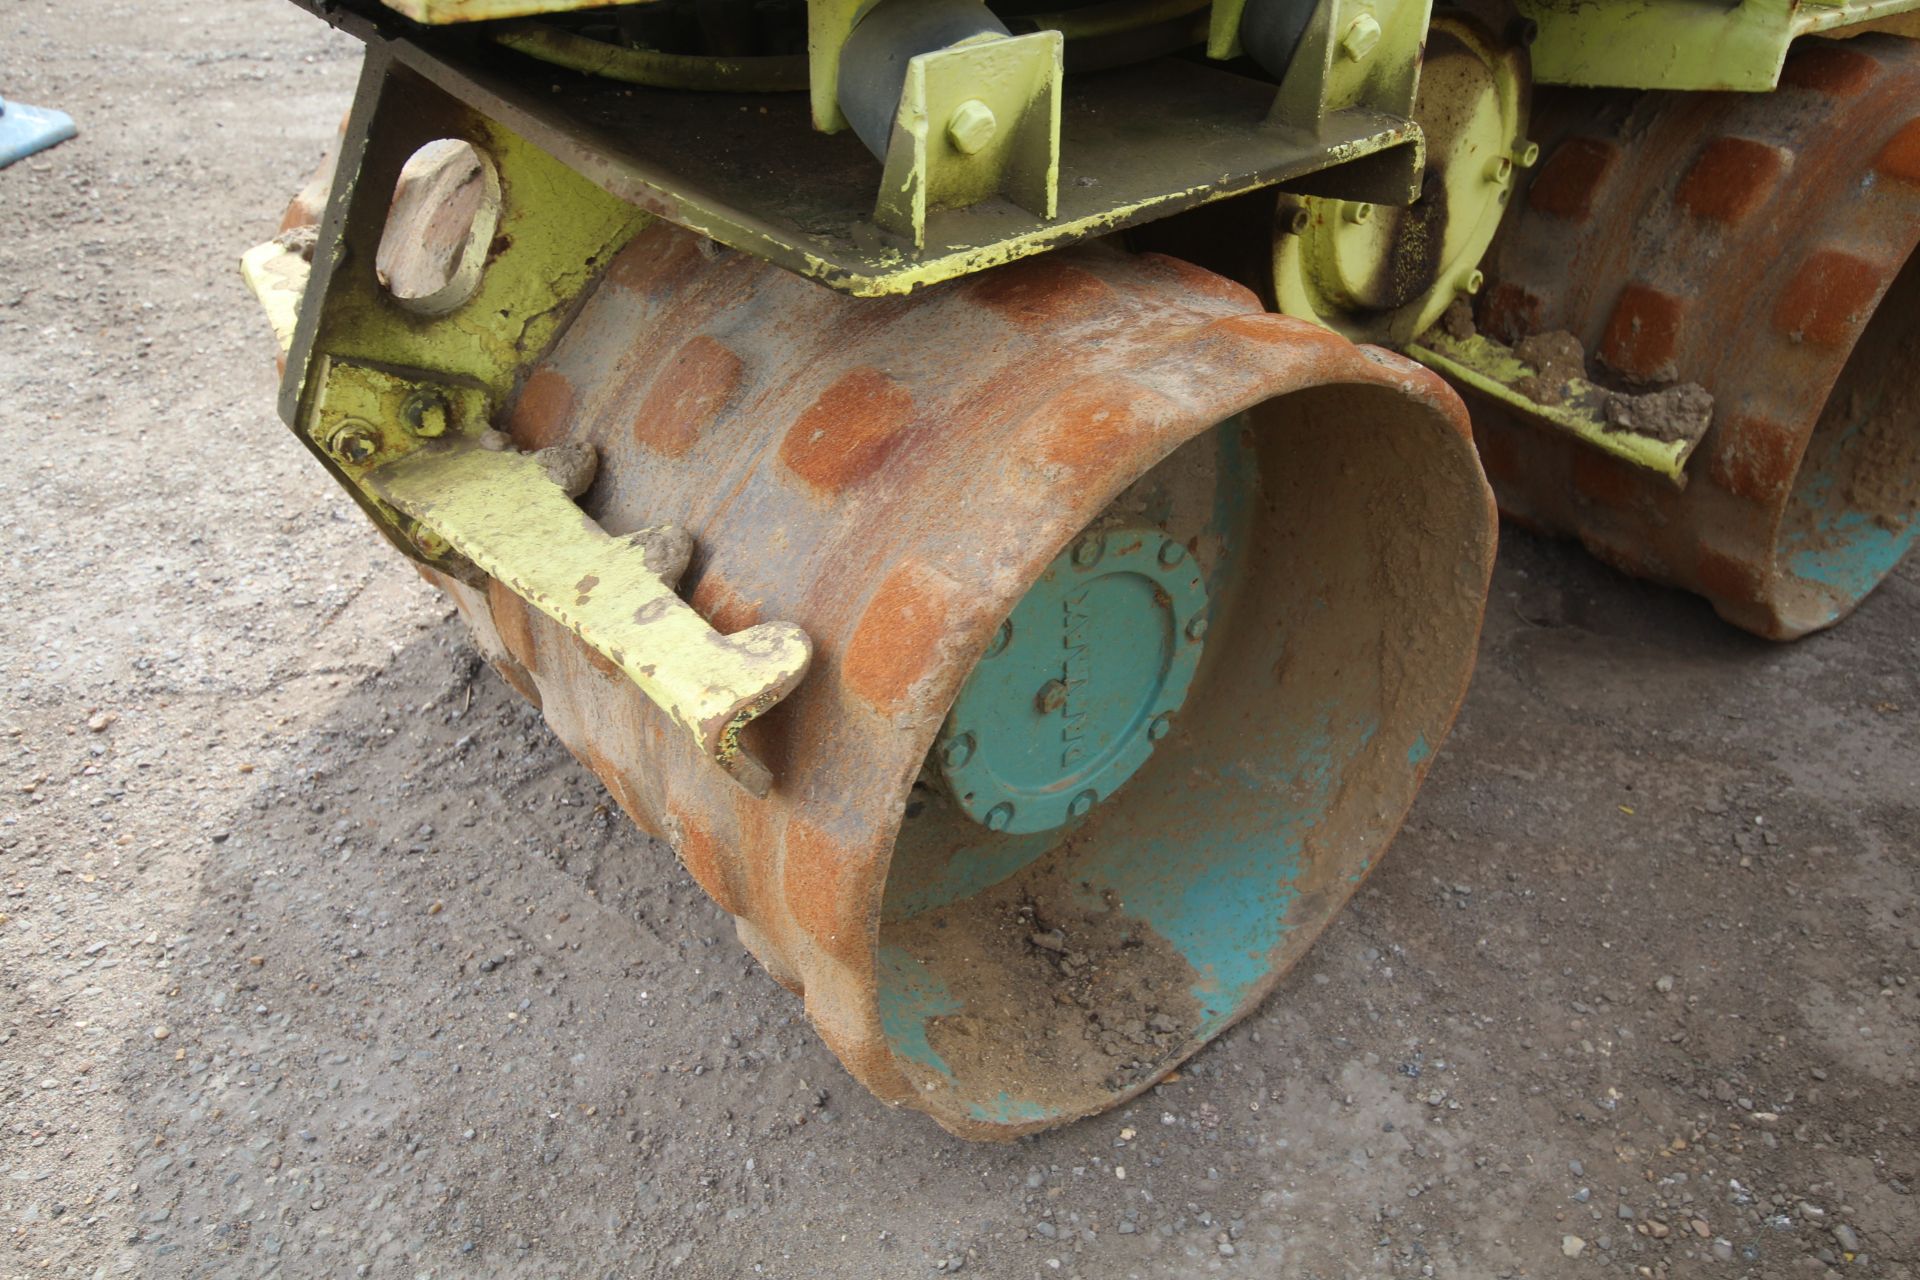 Rammax double drum trench roller. With Hatz diesel engine. Key held. V - Image 7 of 13